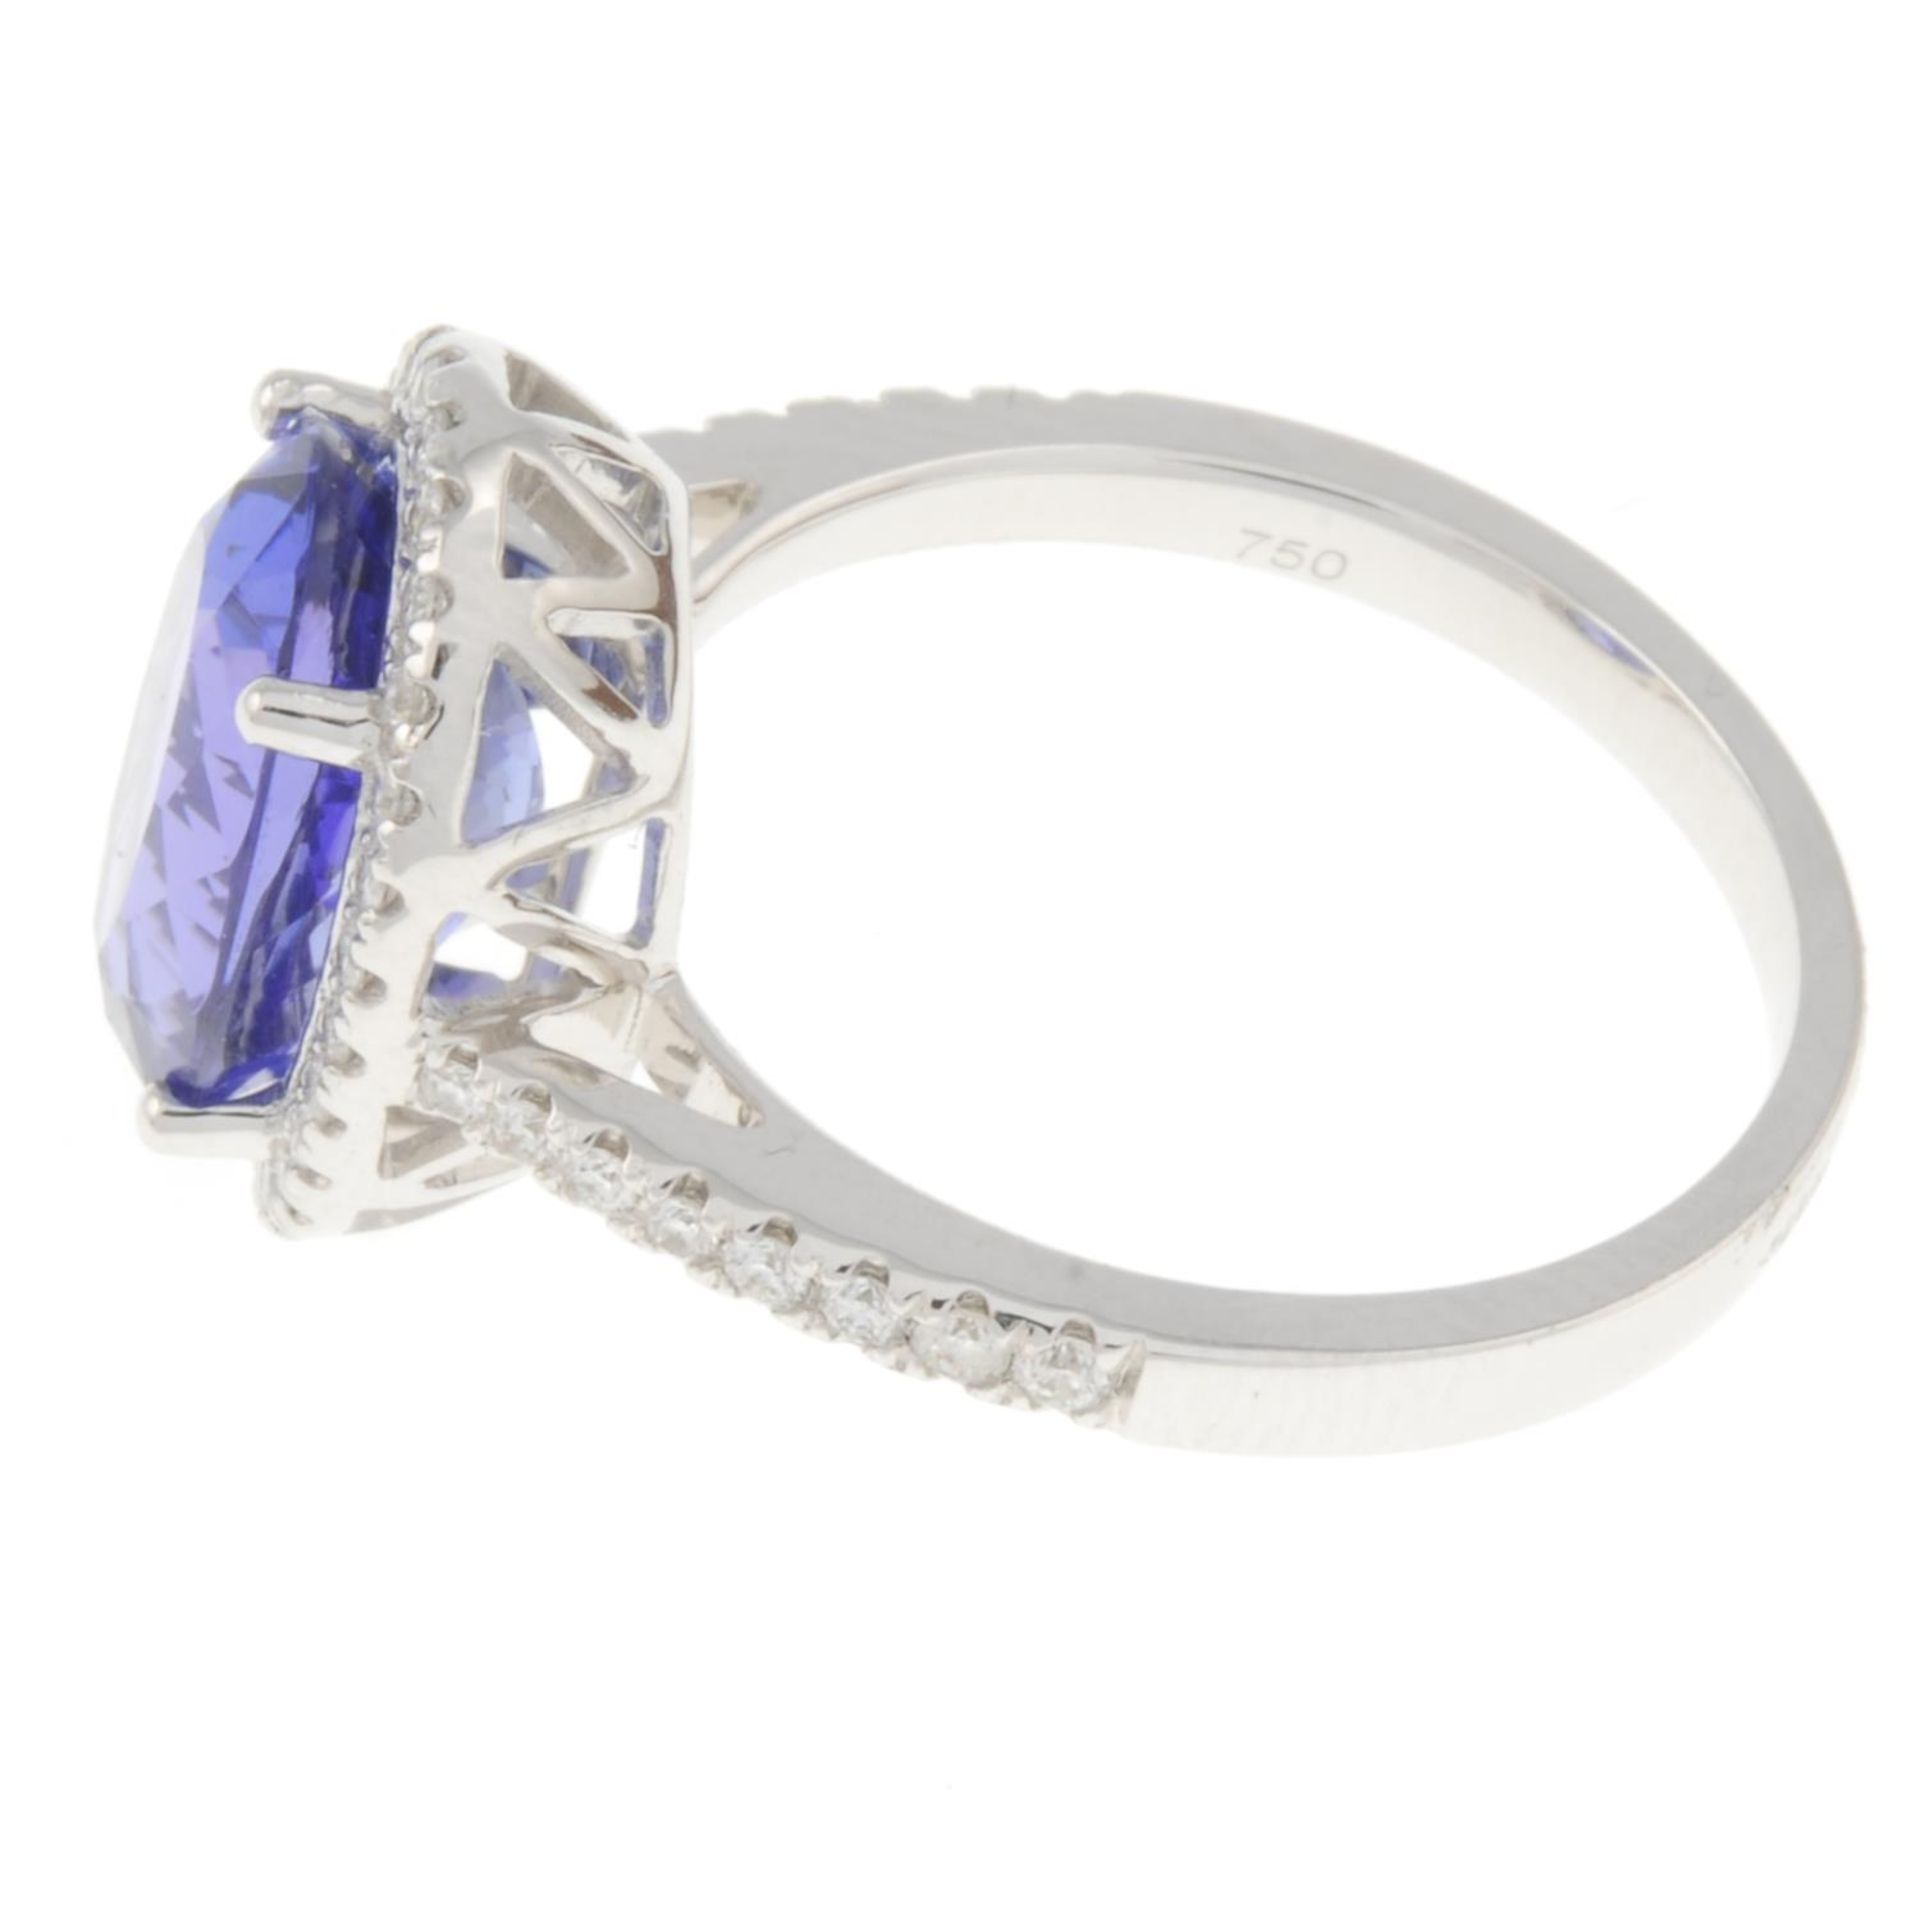 An 18ct gold tanzanite ring, with brilliant-cut diamond surround and sides. - Image 2 of 4